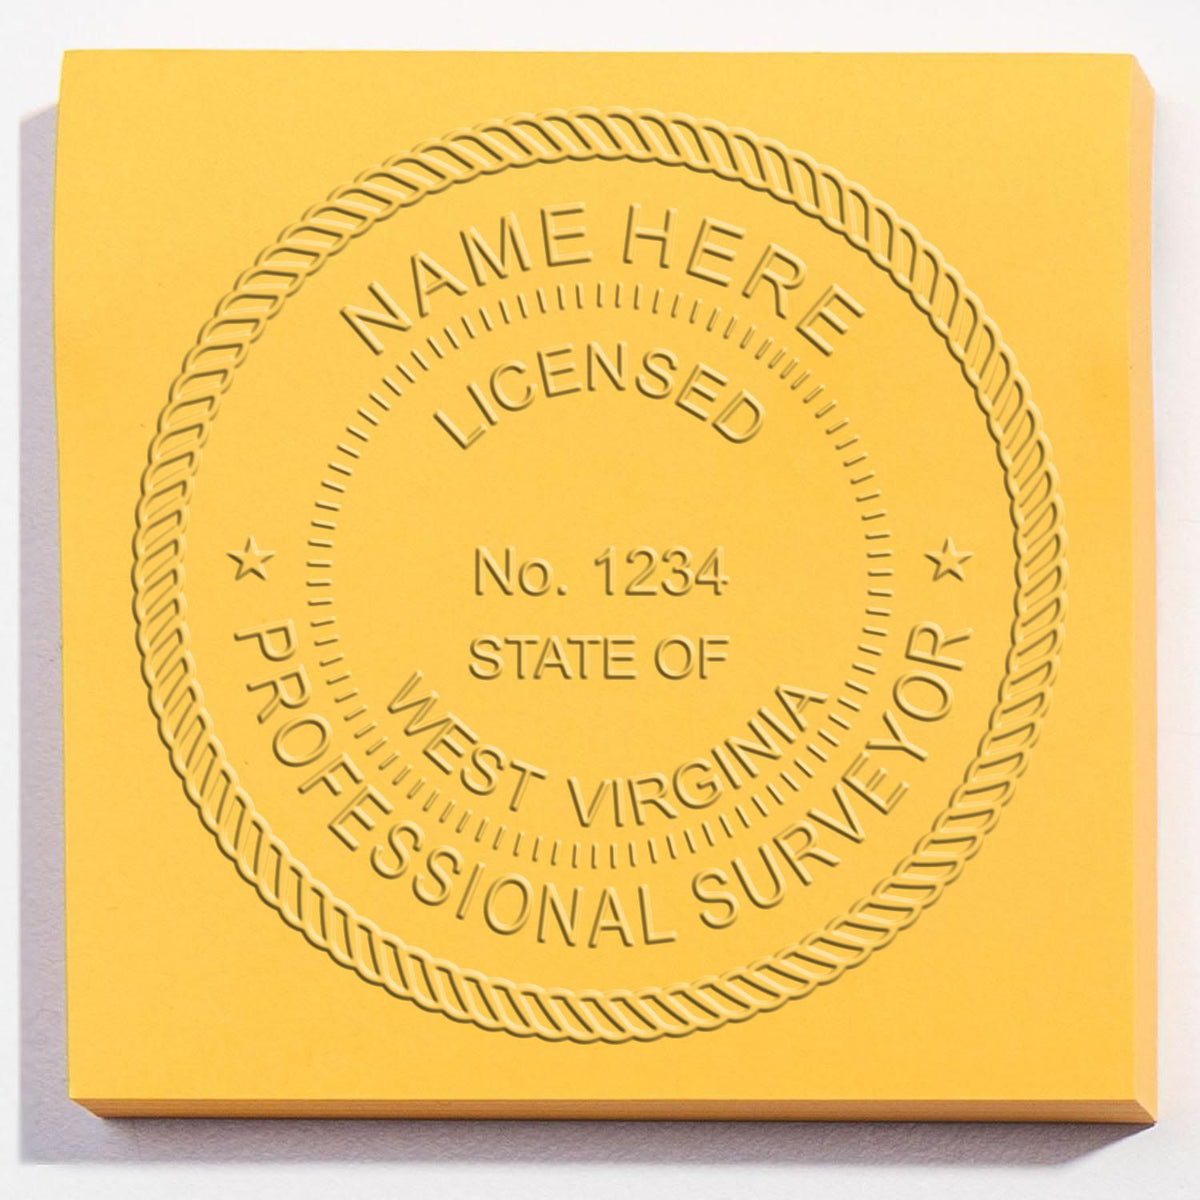 An in use photo of the Hybrid West Virginia Land Surveyor Seal showing a sample imprint on a cardstock